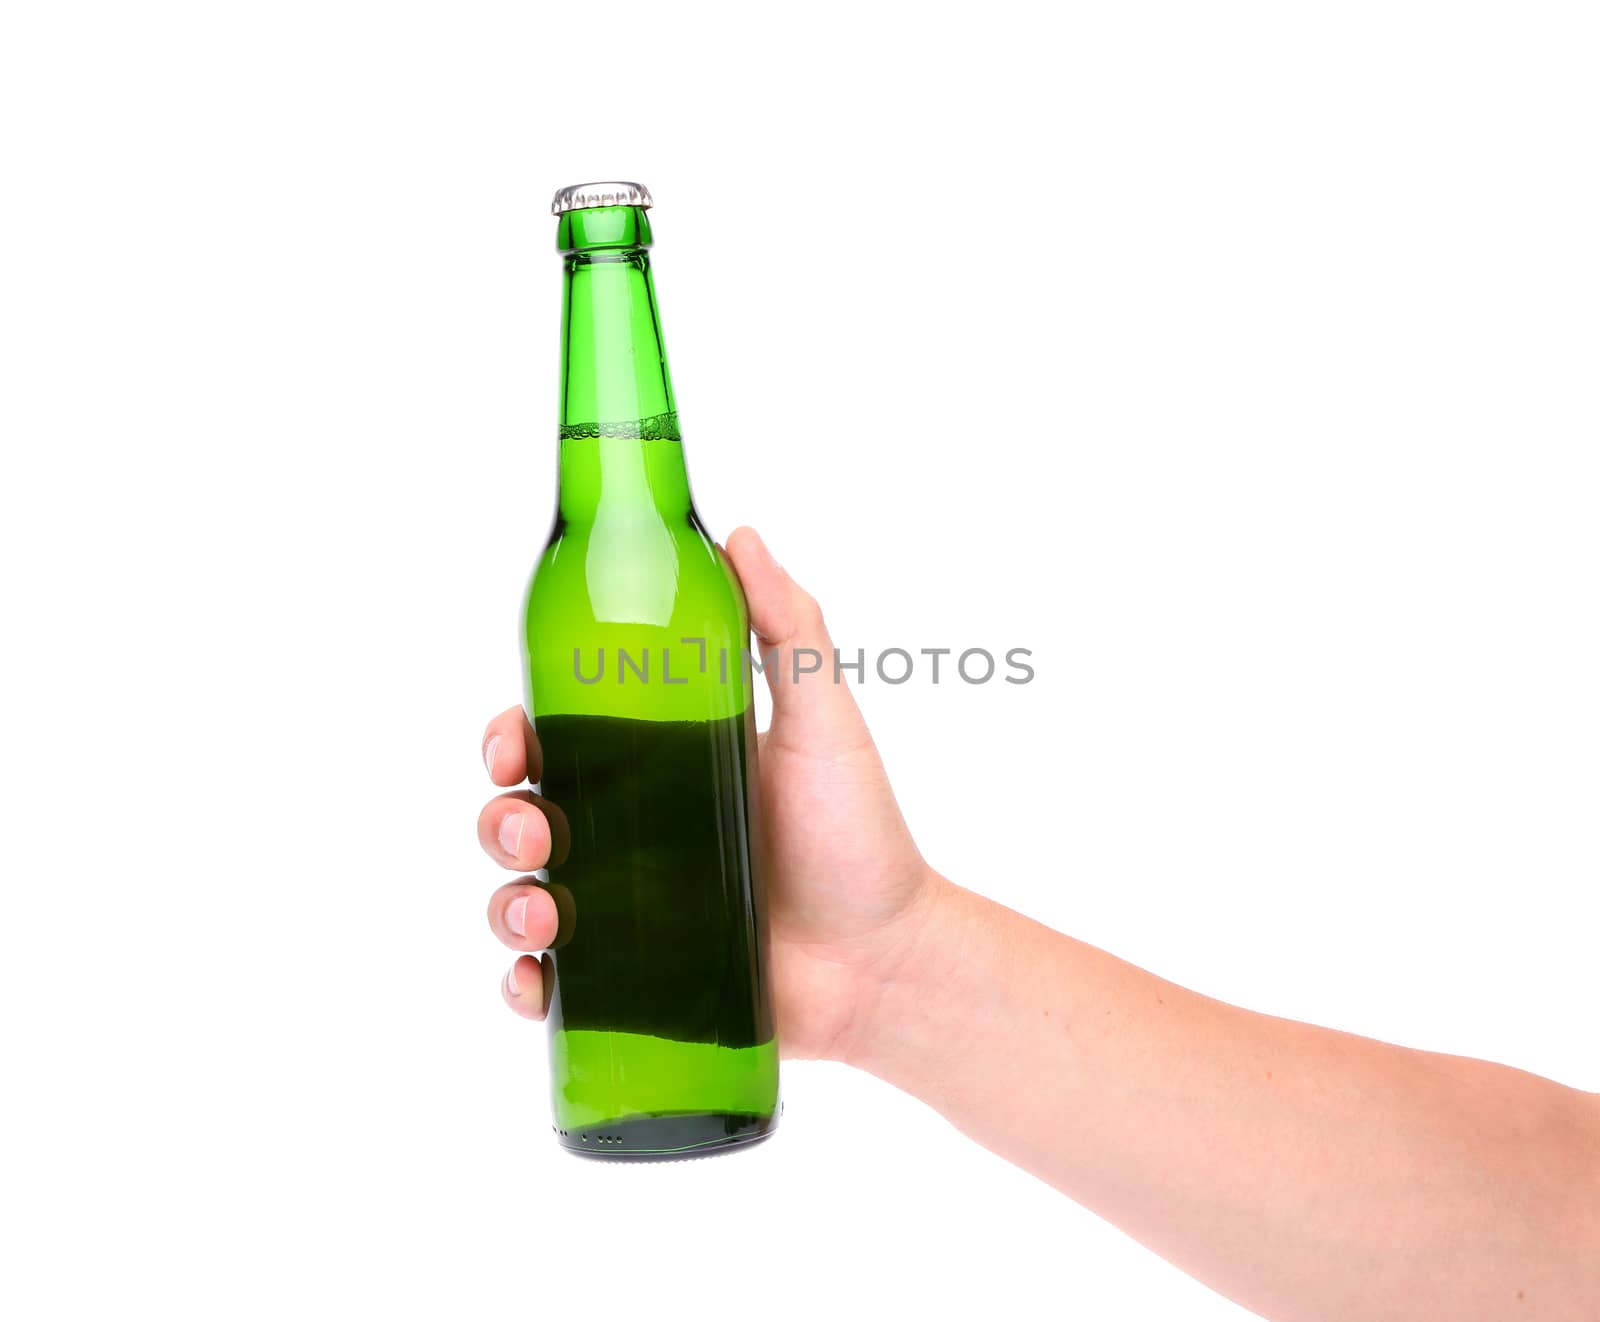 A hand holding up a green beer bottle without label over a white background vertical format